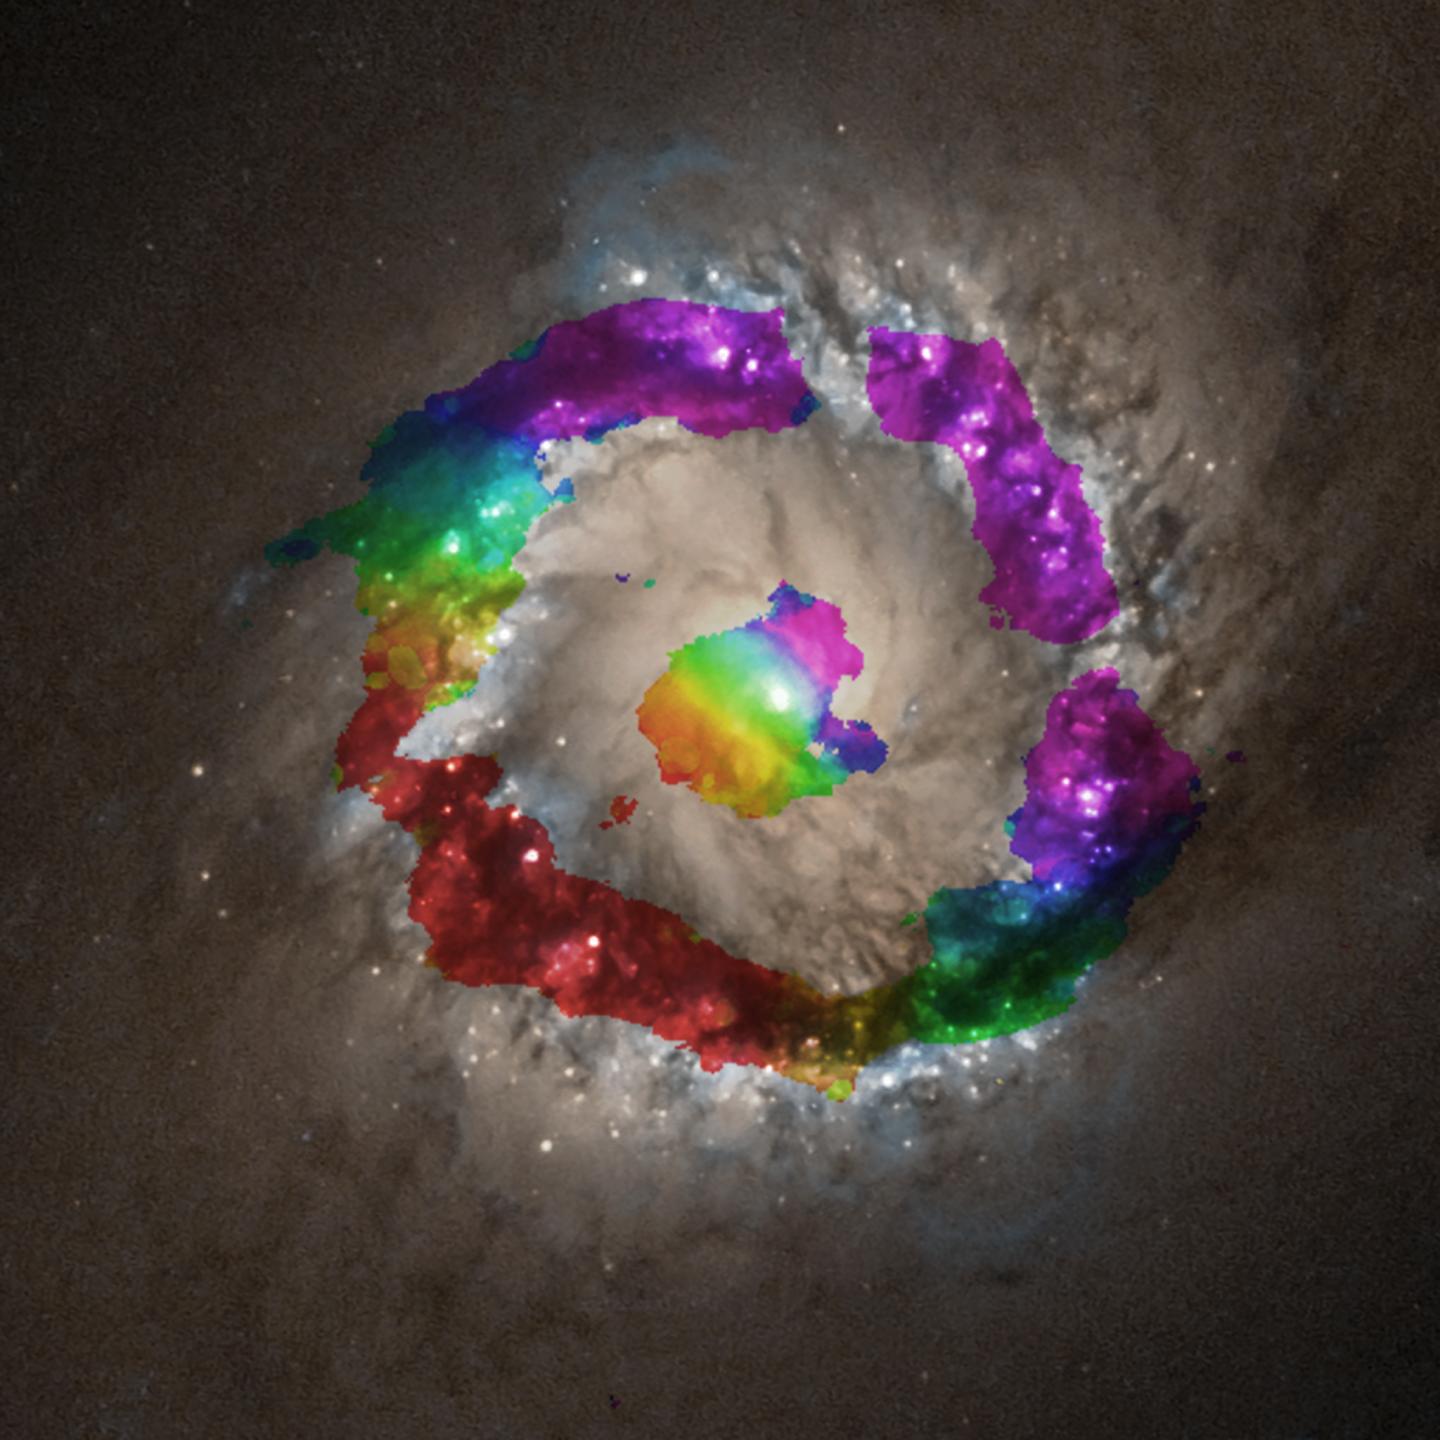 Central Region of NGC 1097 Observed with ALMA